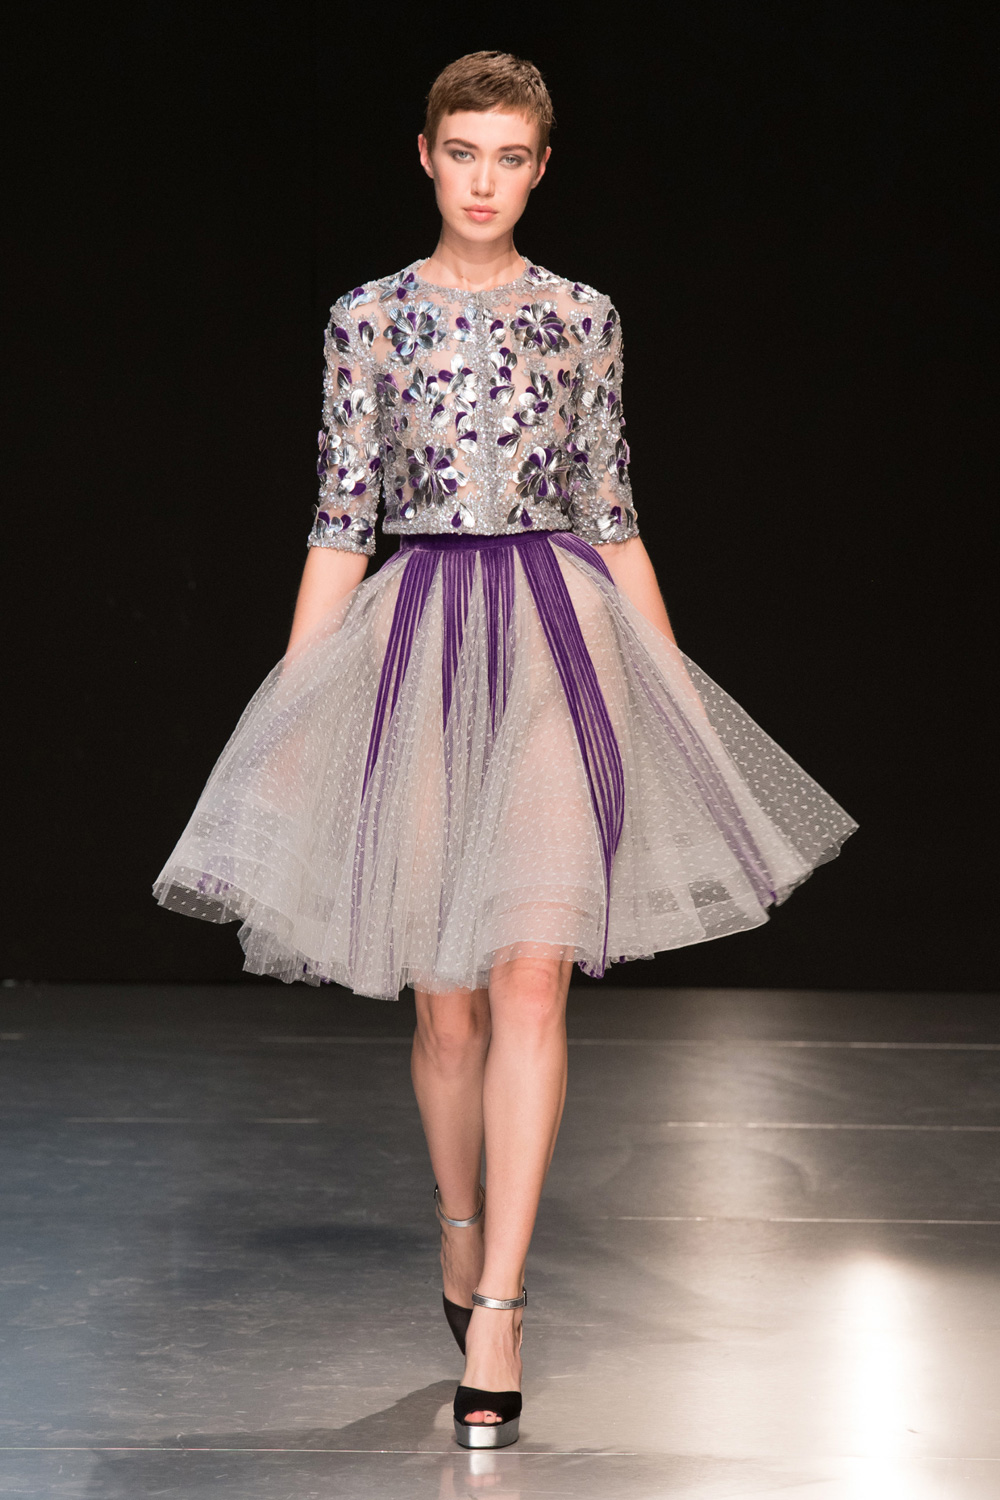 Lebanese Designers Double the Wow Factor Dose at Paris Haute Couture ...